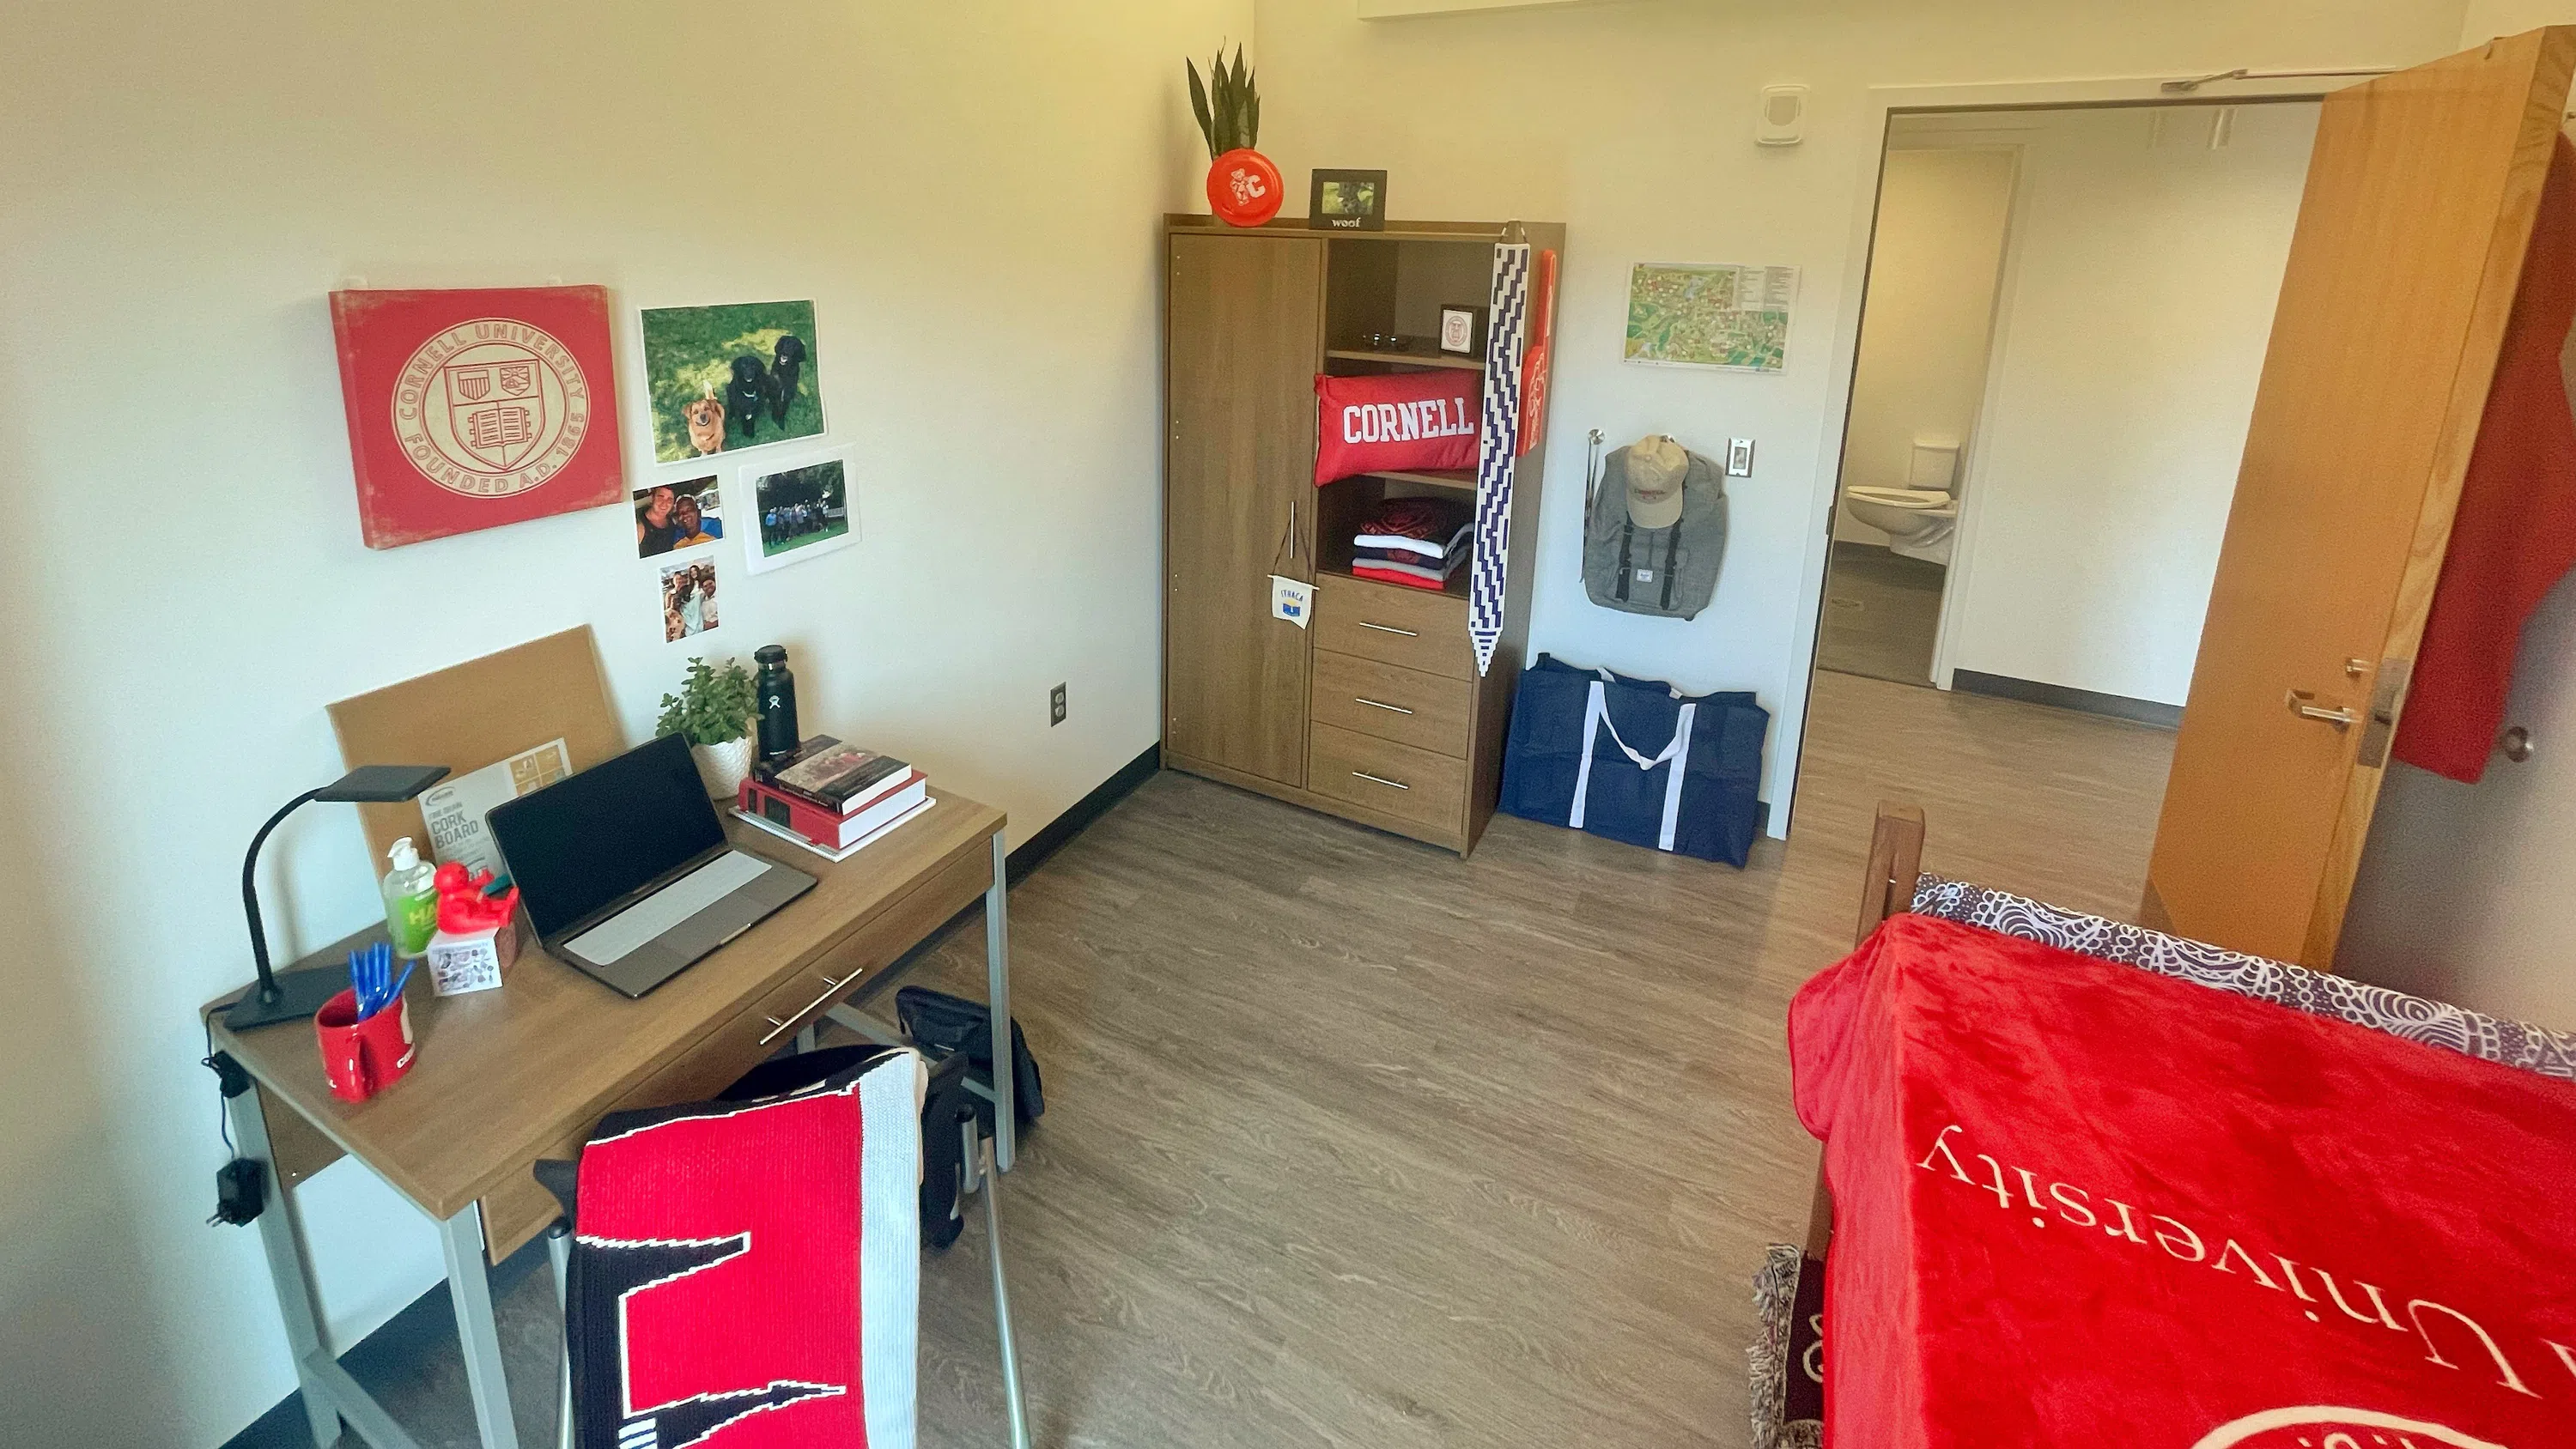 A typical residence hall room in Toni Morrison Hall.